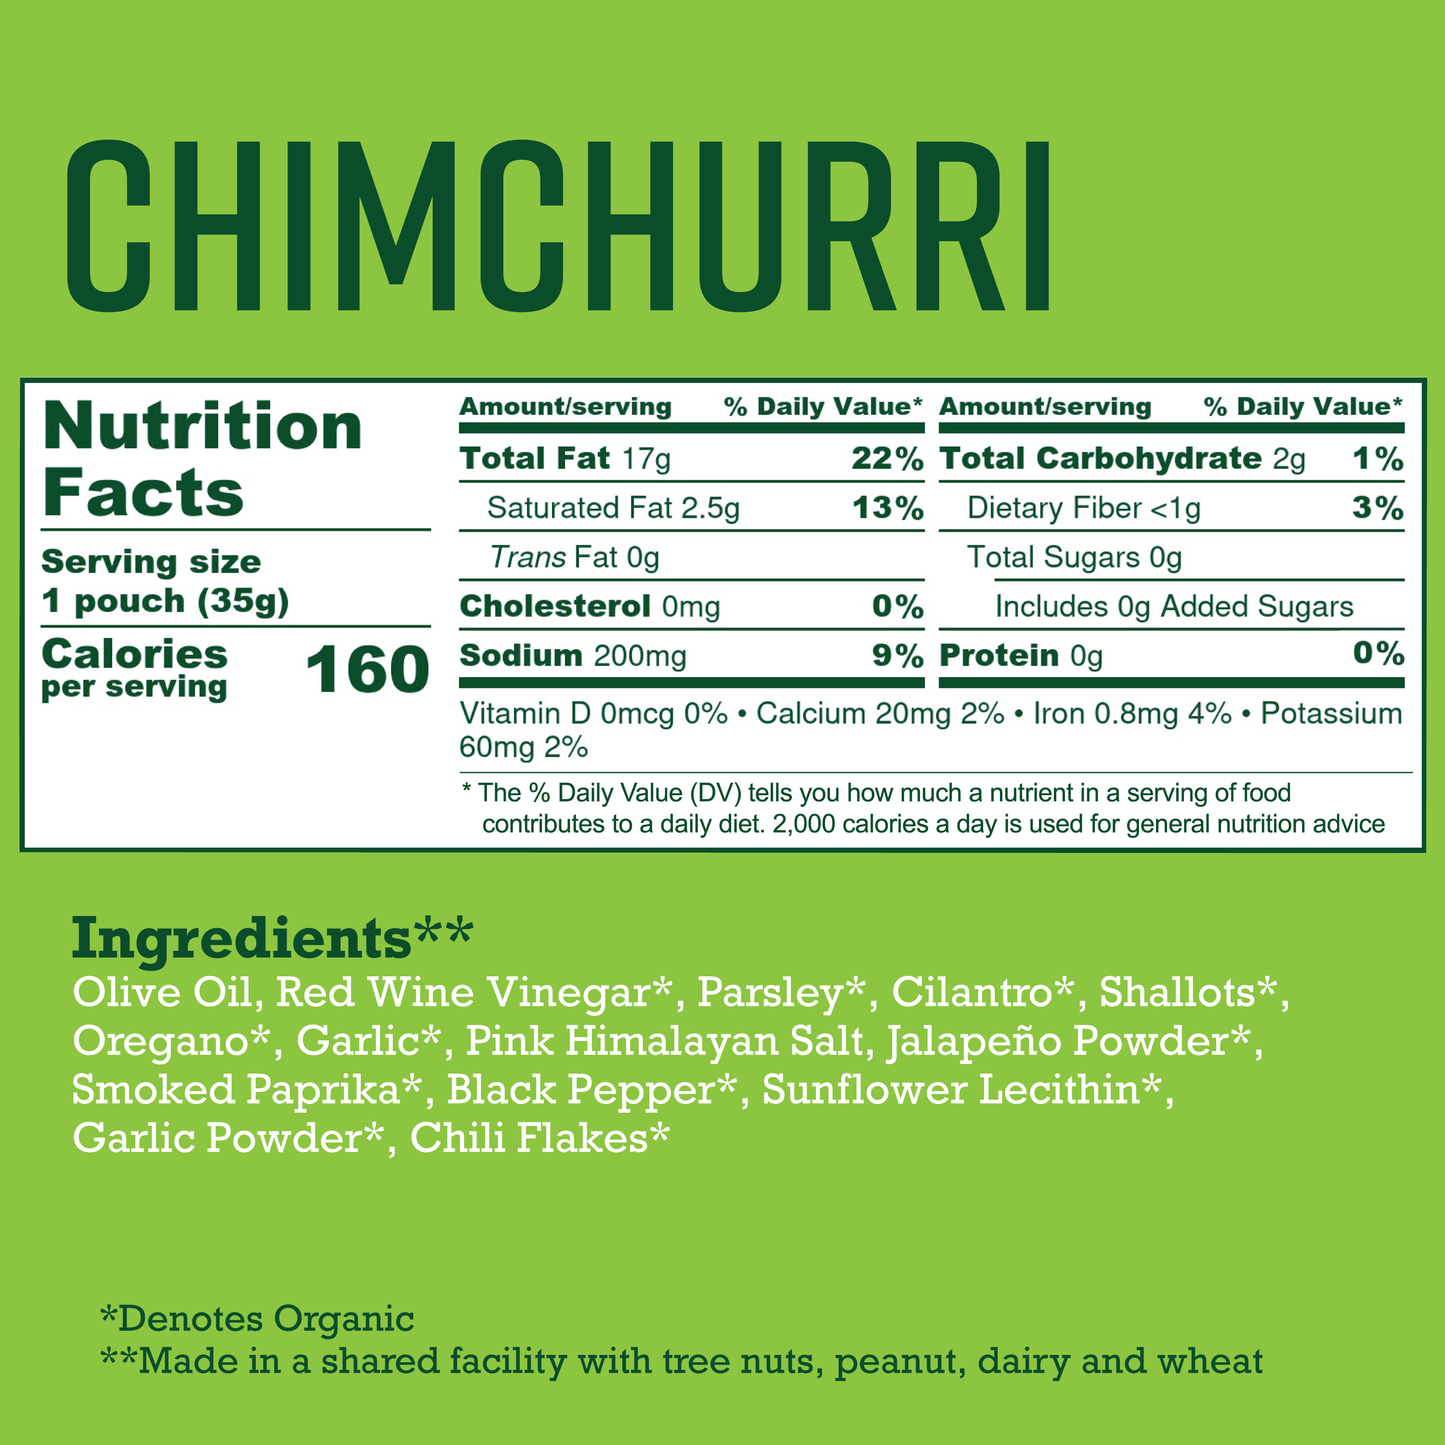 Howl at the Spoon's Chimichurri, 6 Single-Serve Sauces - No Preservatives, Natural, Plant Based, Vegan